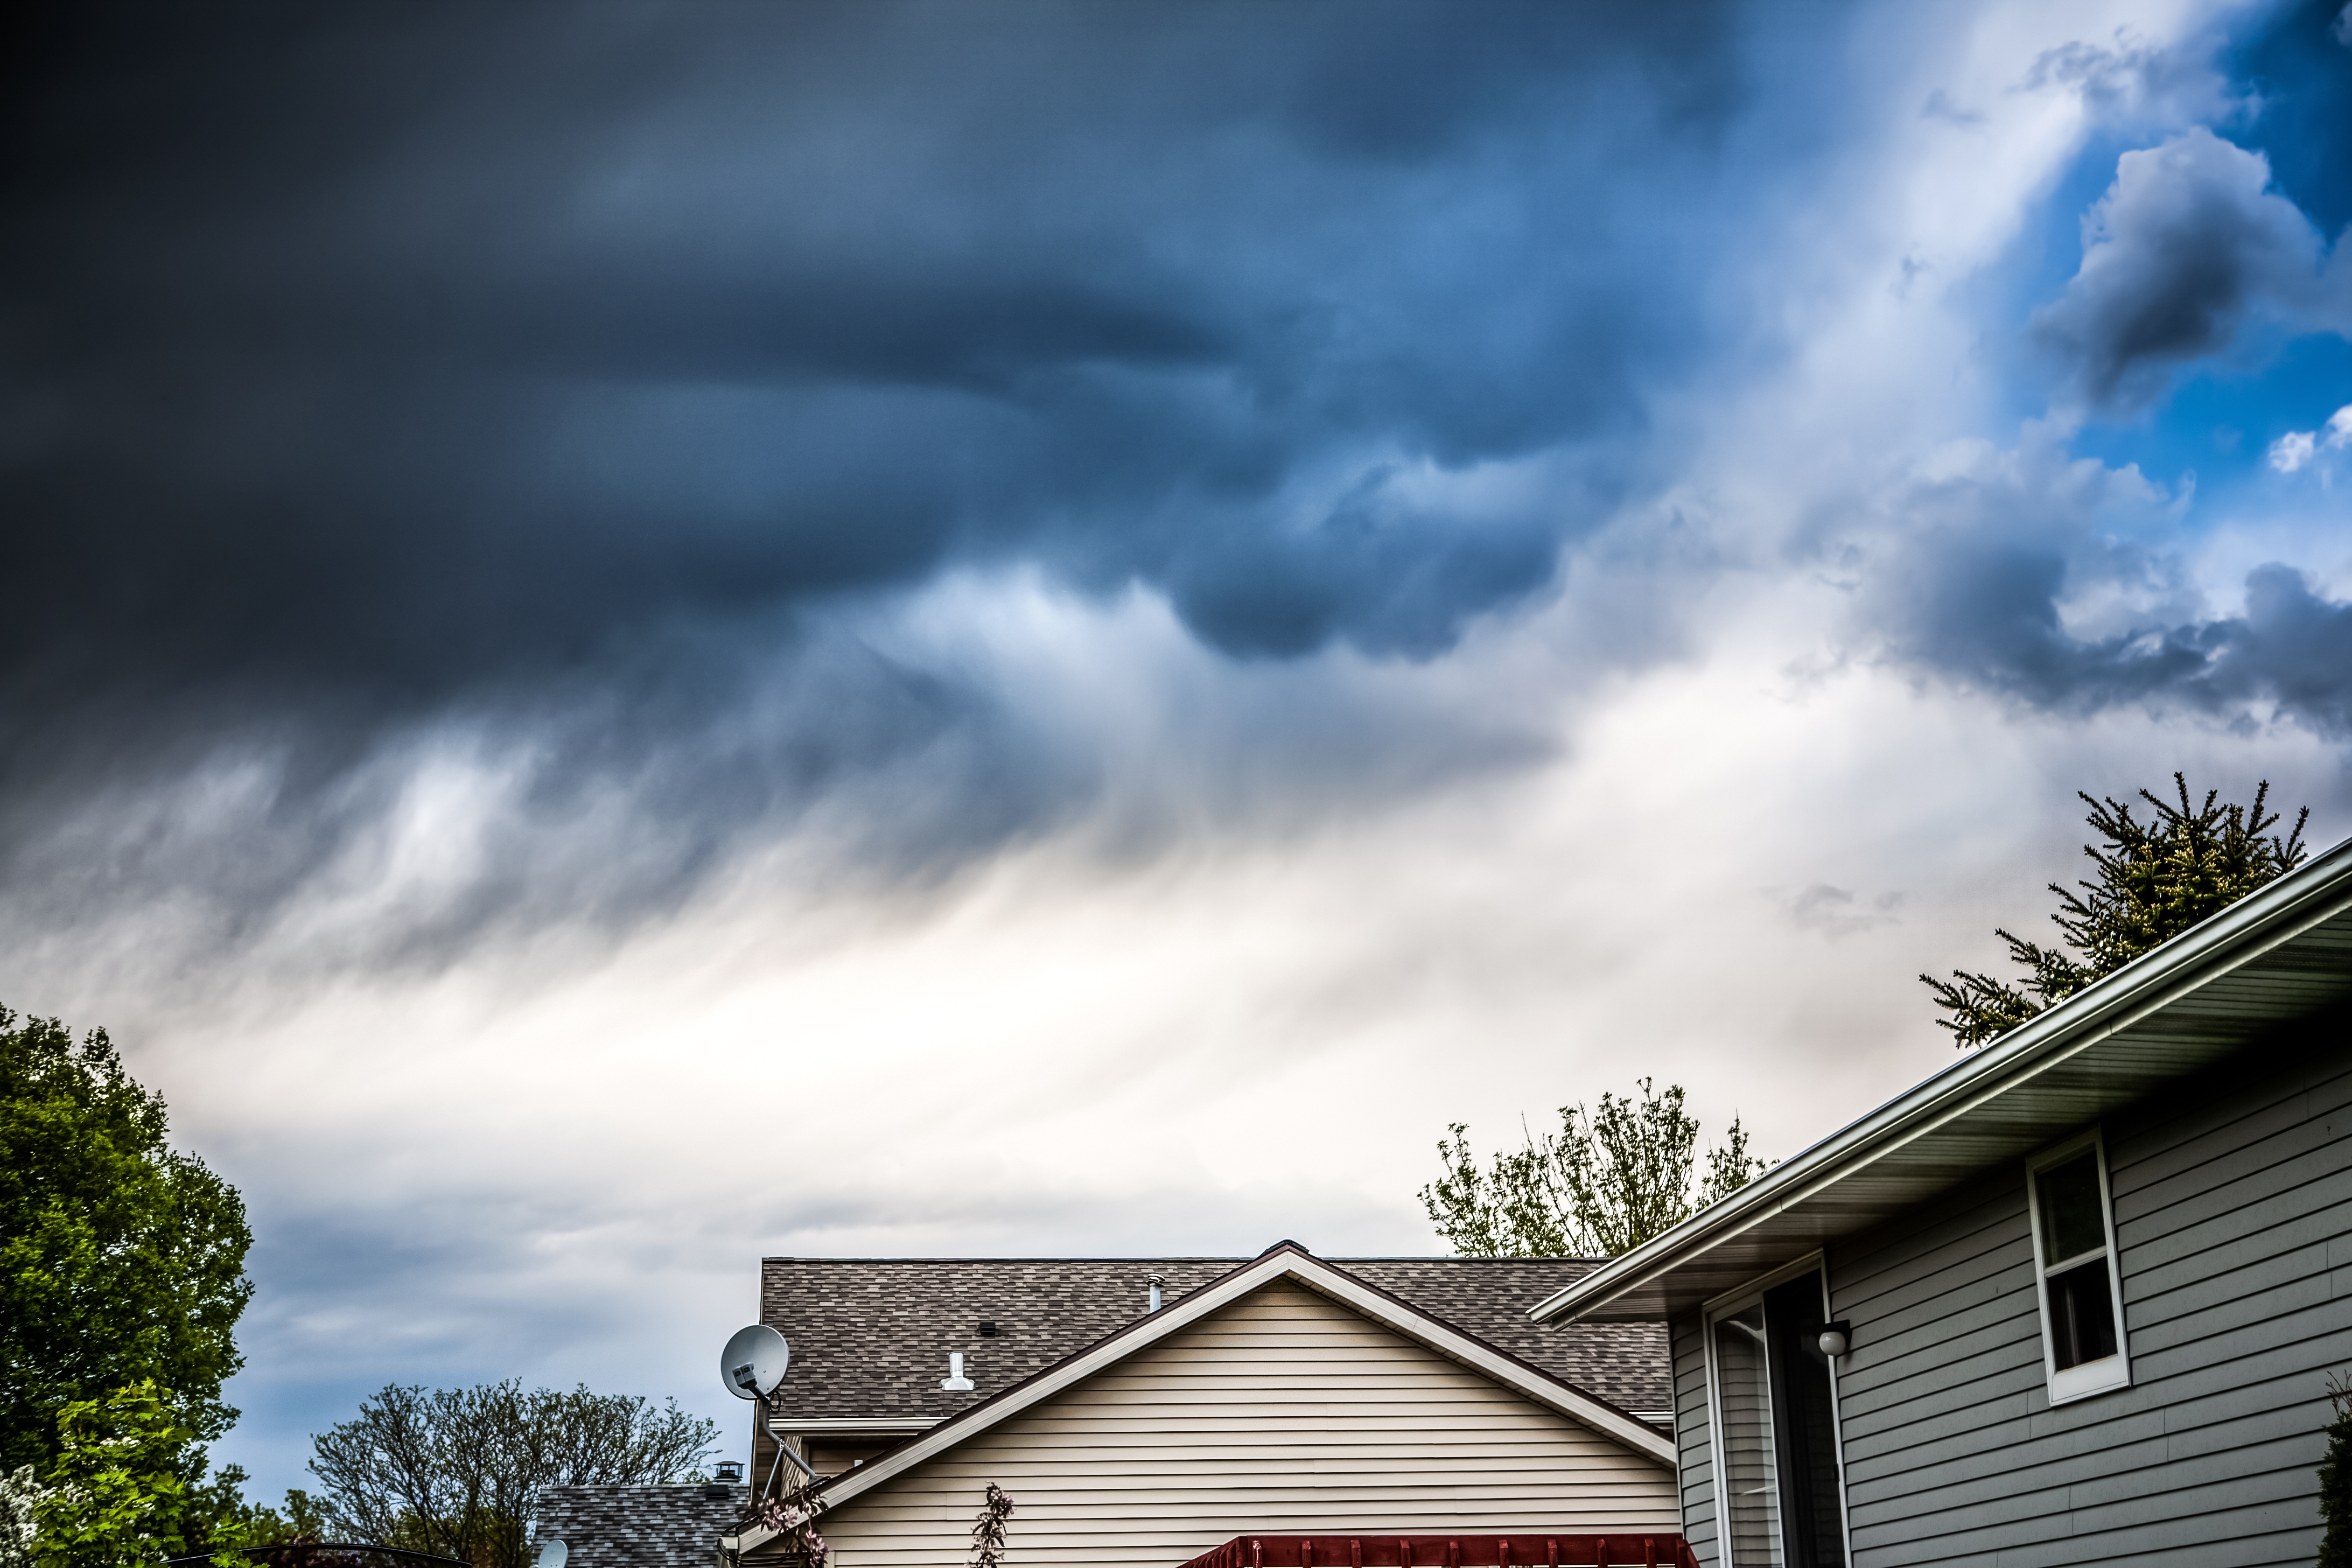 Image of thunderstorm over homes